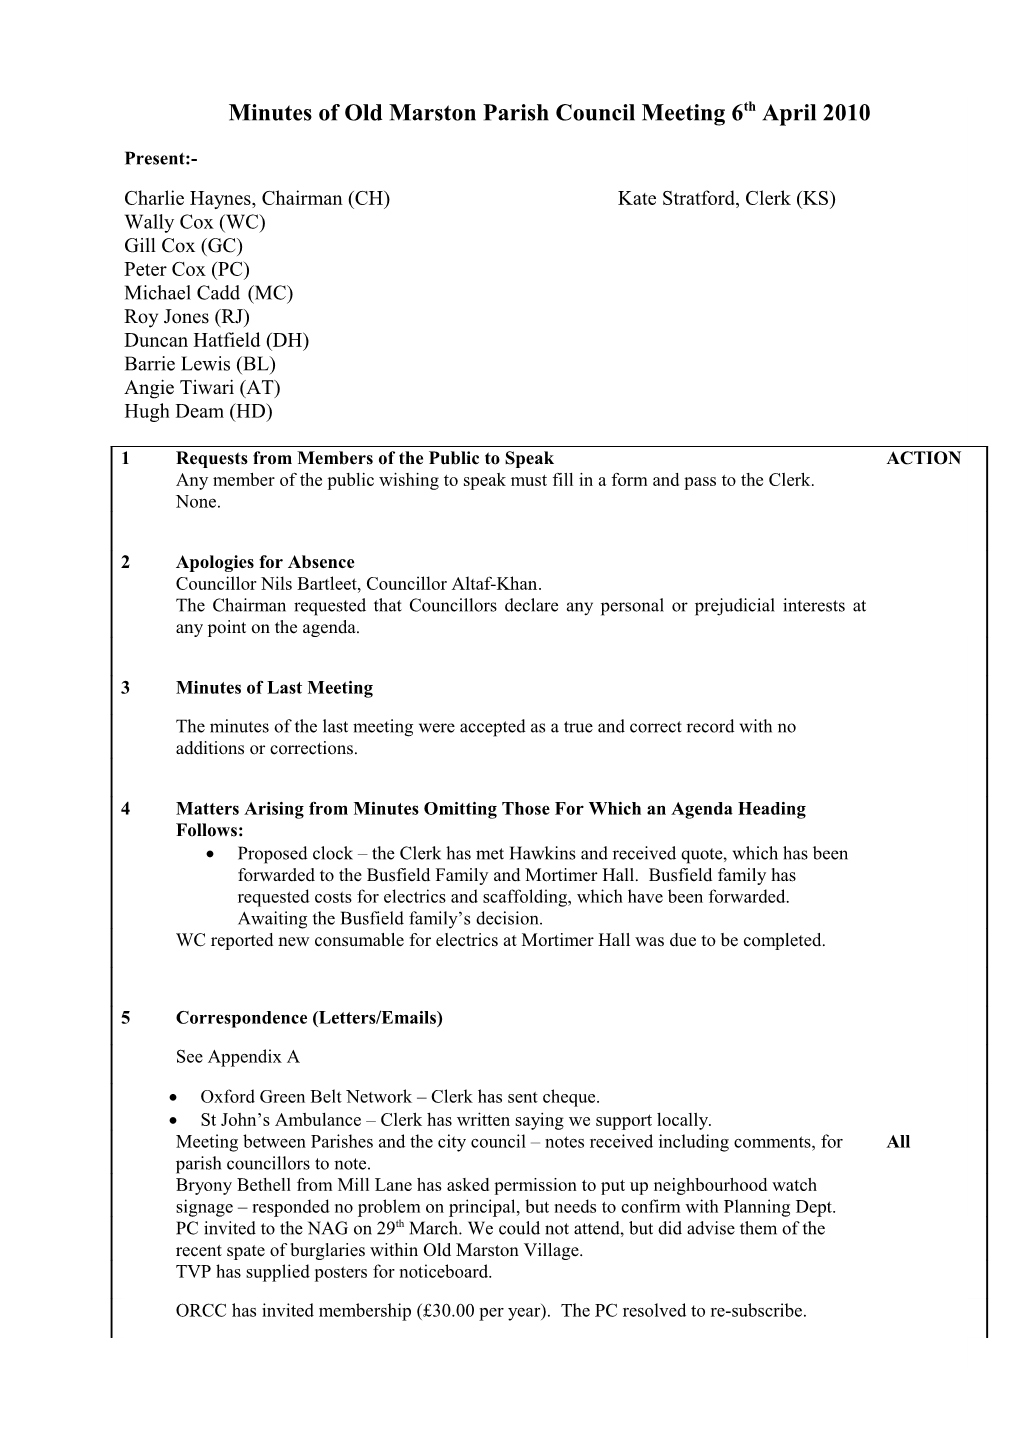 Minutes of Old Marston Parish Council Meeting 1St April 2008